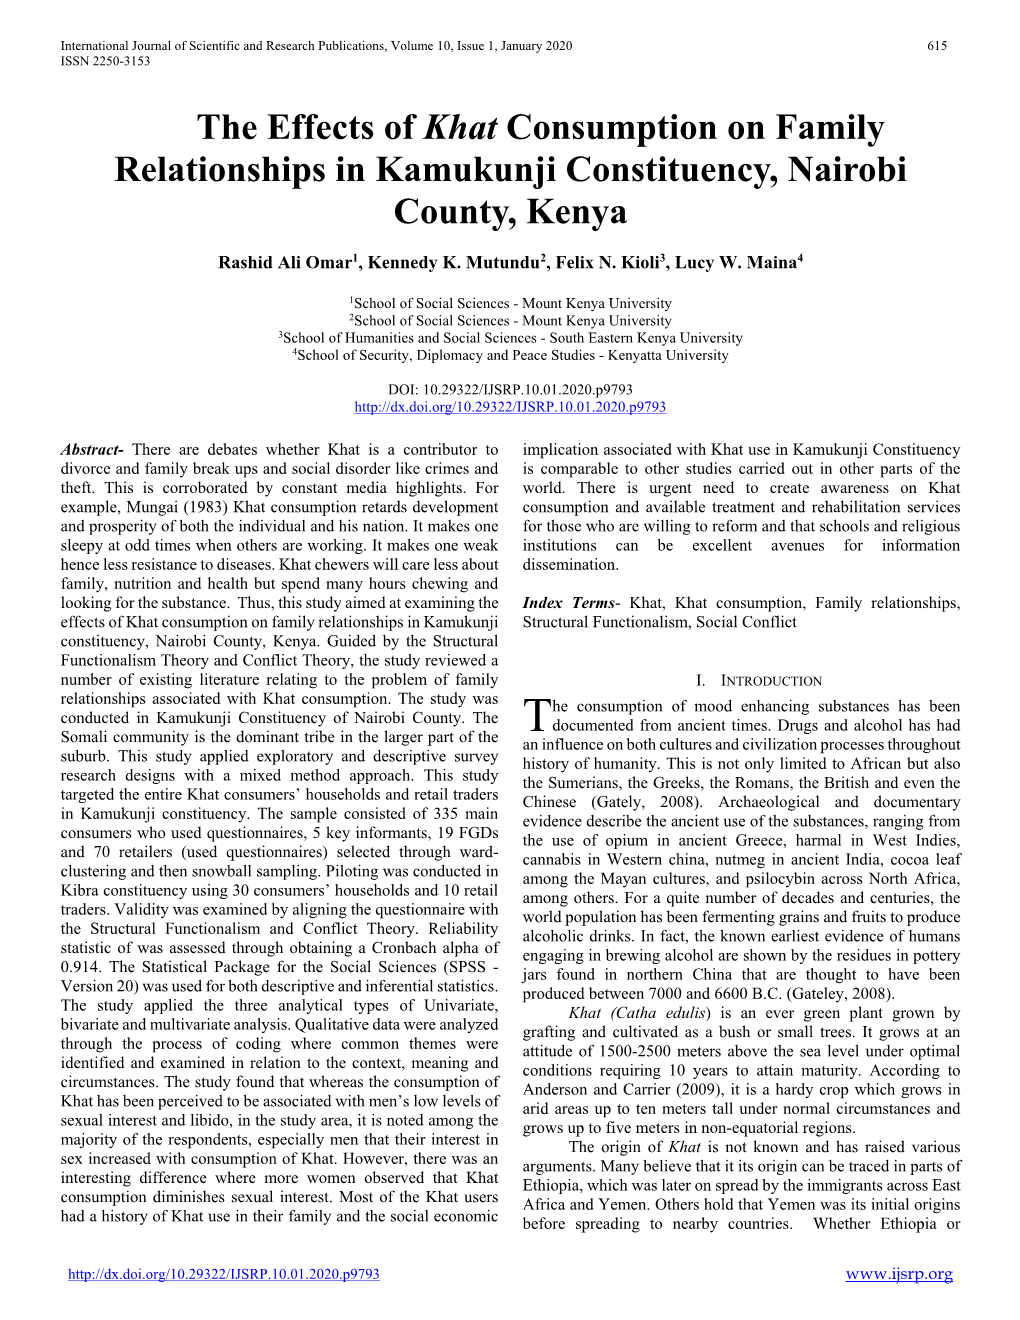 The Effects of Khat Consumption on Family Relationships in Kamukunji Constituency, Nairobi County, Kenya